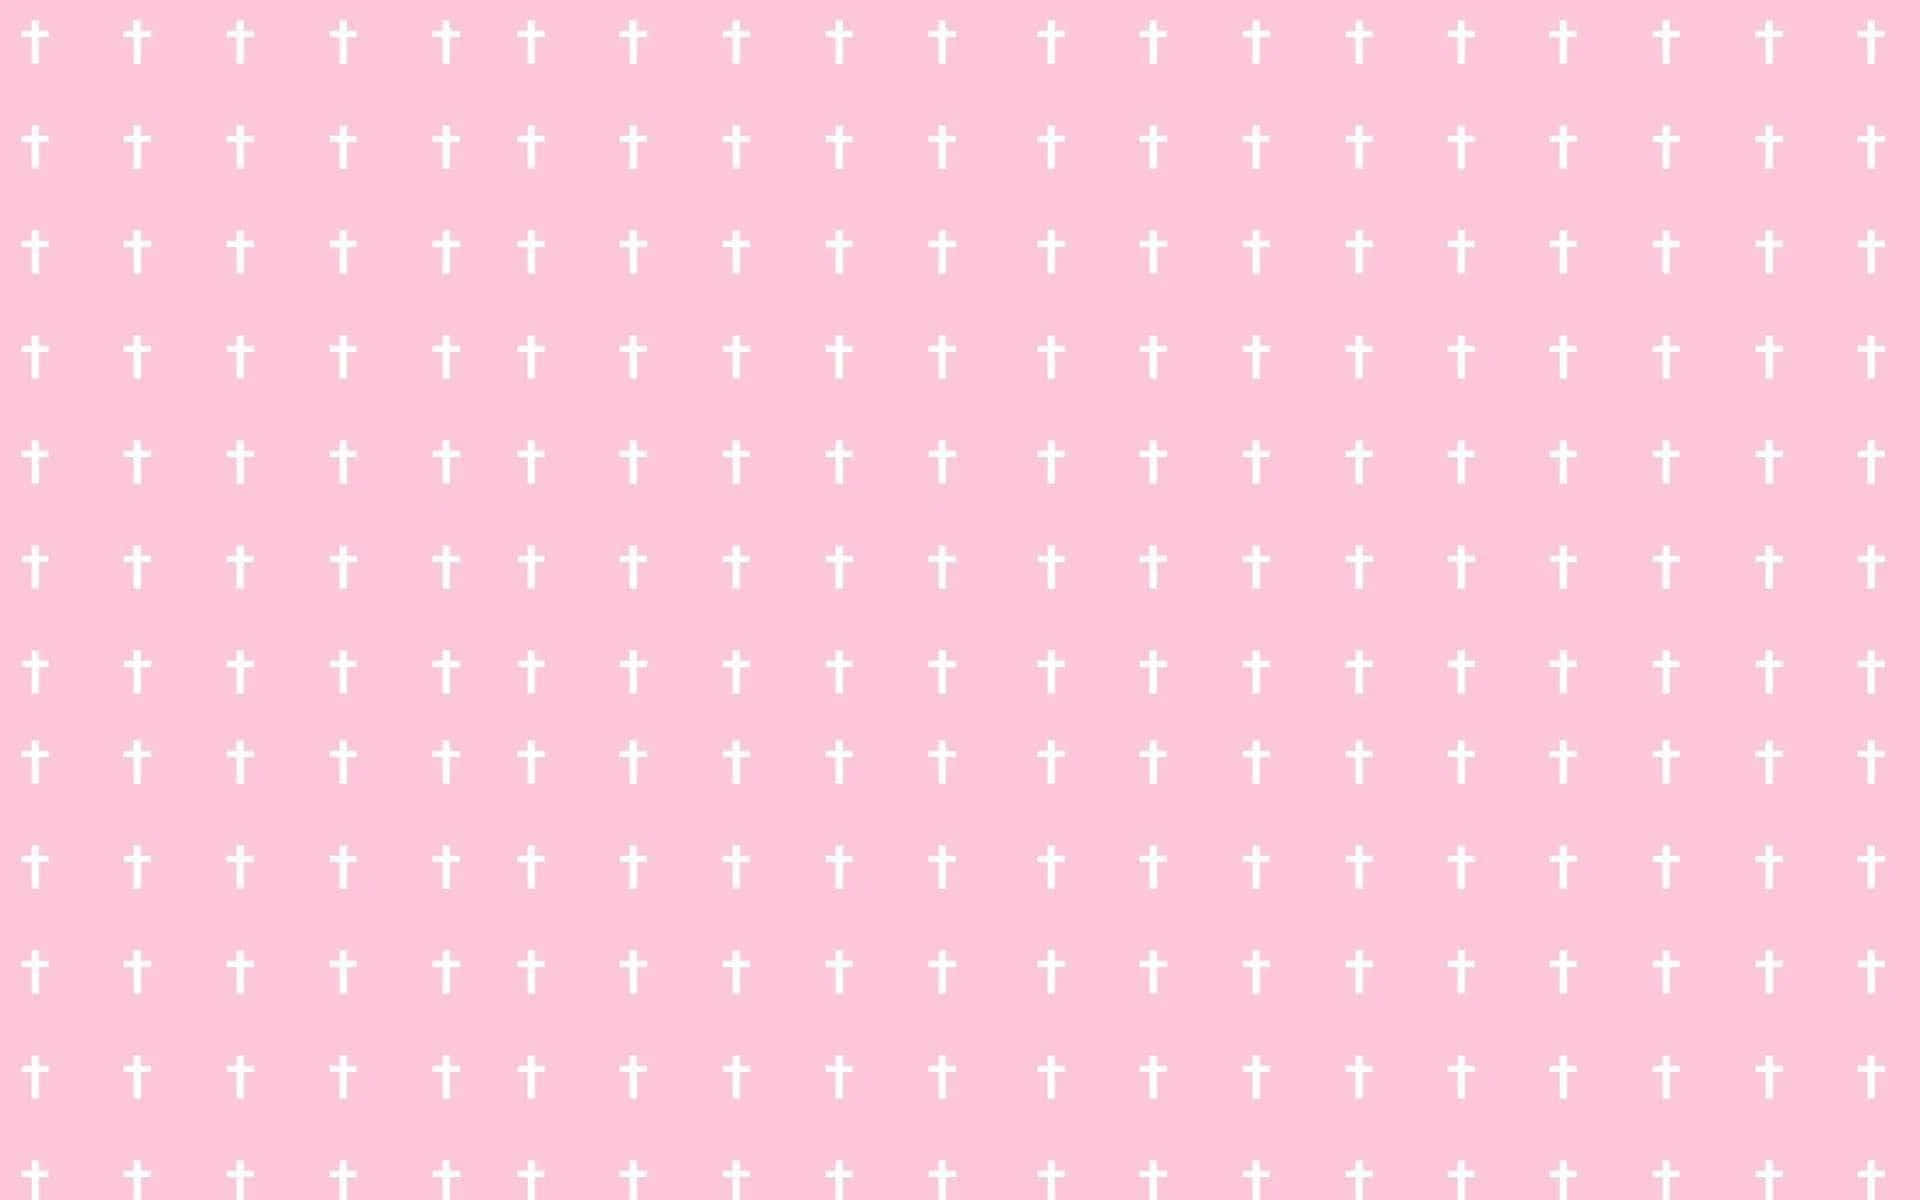 A Pink Background With White Crosses On It